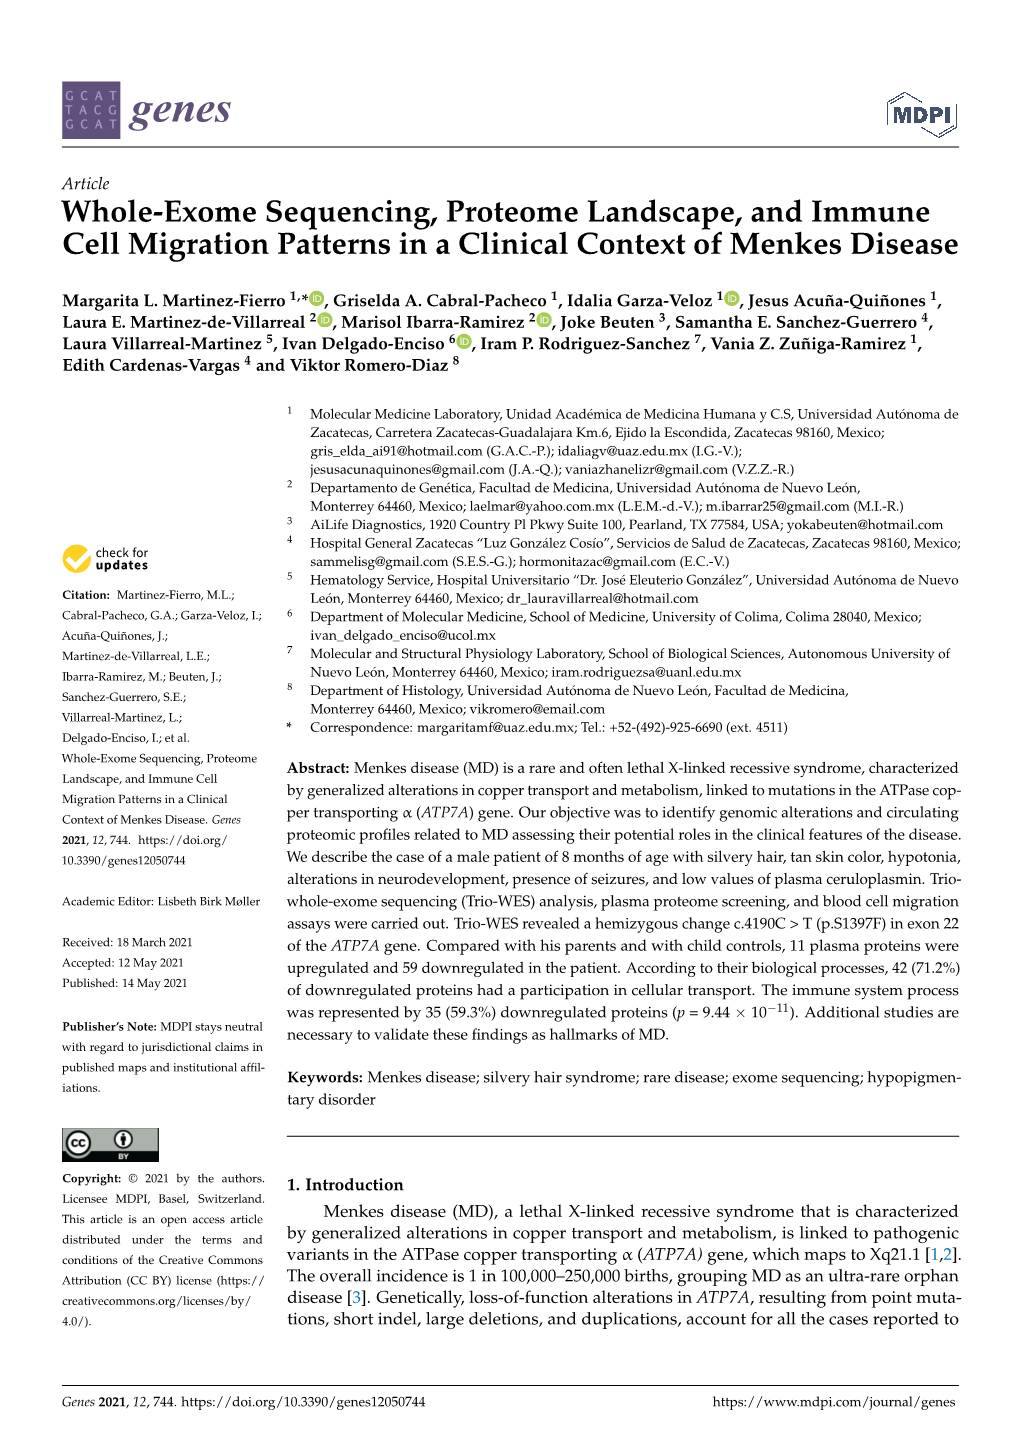 Whole-Exome Sequencing, Proteome Landscape, and Immune Cell Migration Patterns in a Clinical Context of Menkes Disease